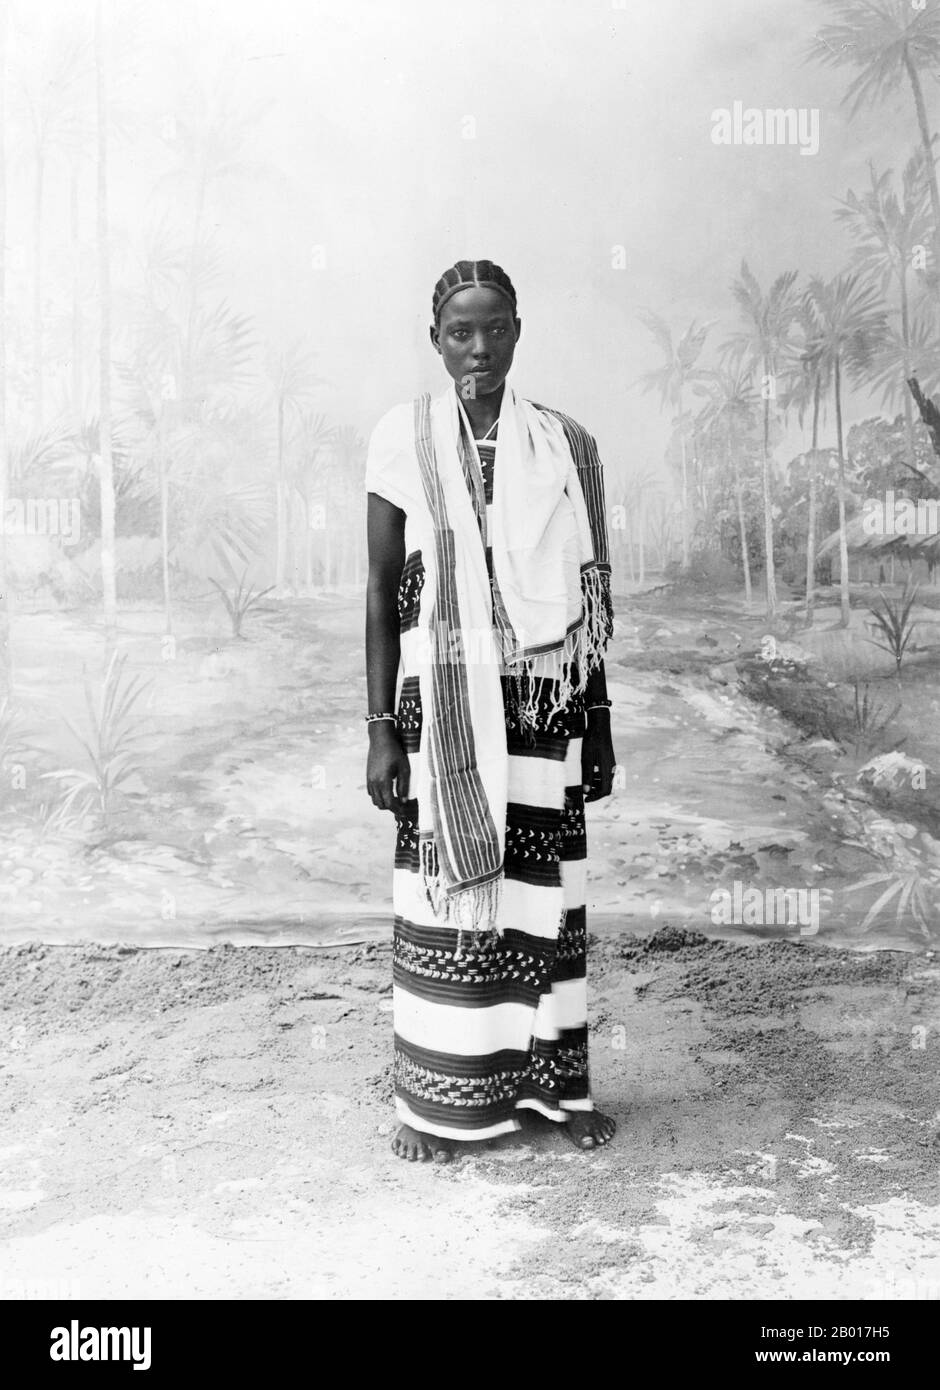 Tanzania: A young Swahili woman in Dar es Salaam, c. 1900.  In the late 19th century, Imperial Germany conquered the regions that are now Tanzania (minus Zanzibar), Rwanda, and Burundi, and incorporated them into German East Africa. During World War I, an invasion attempt by the British was thwarted by German General Paul von Lettow-Vorbeck, who then mounted a drawn out guerrilla campaign against the British. The post–World War I accords and the League of Nations charter designated the area a British Mandate, except for a small area in the northwest, which was ceded to Belgium. Stock Photo